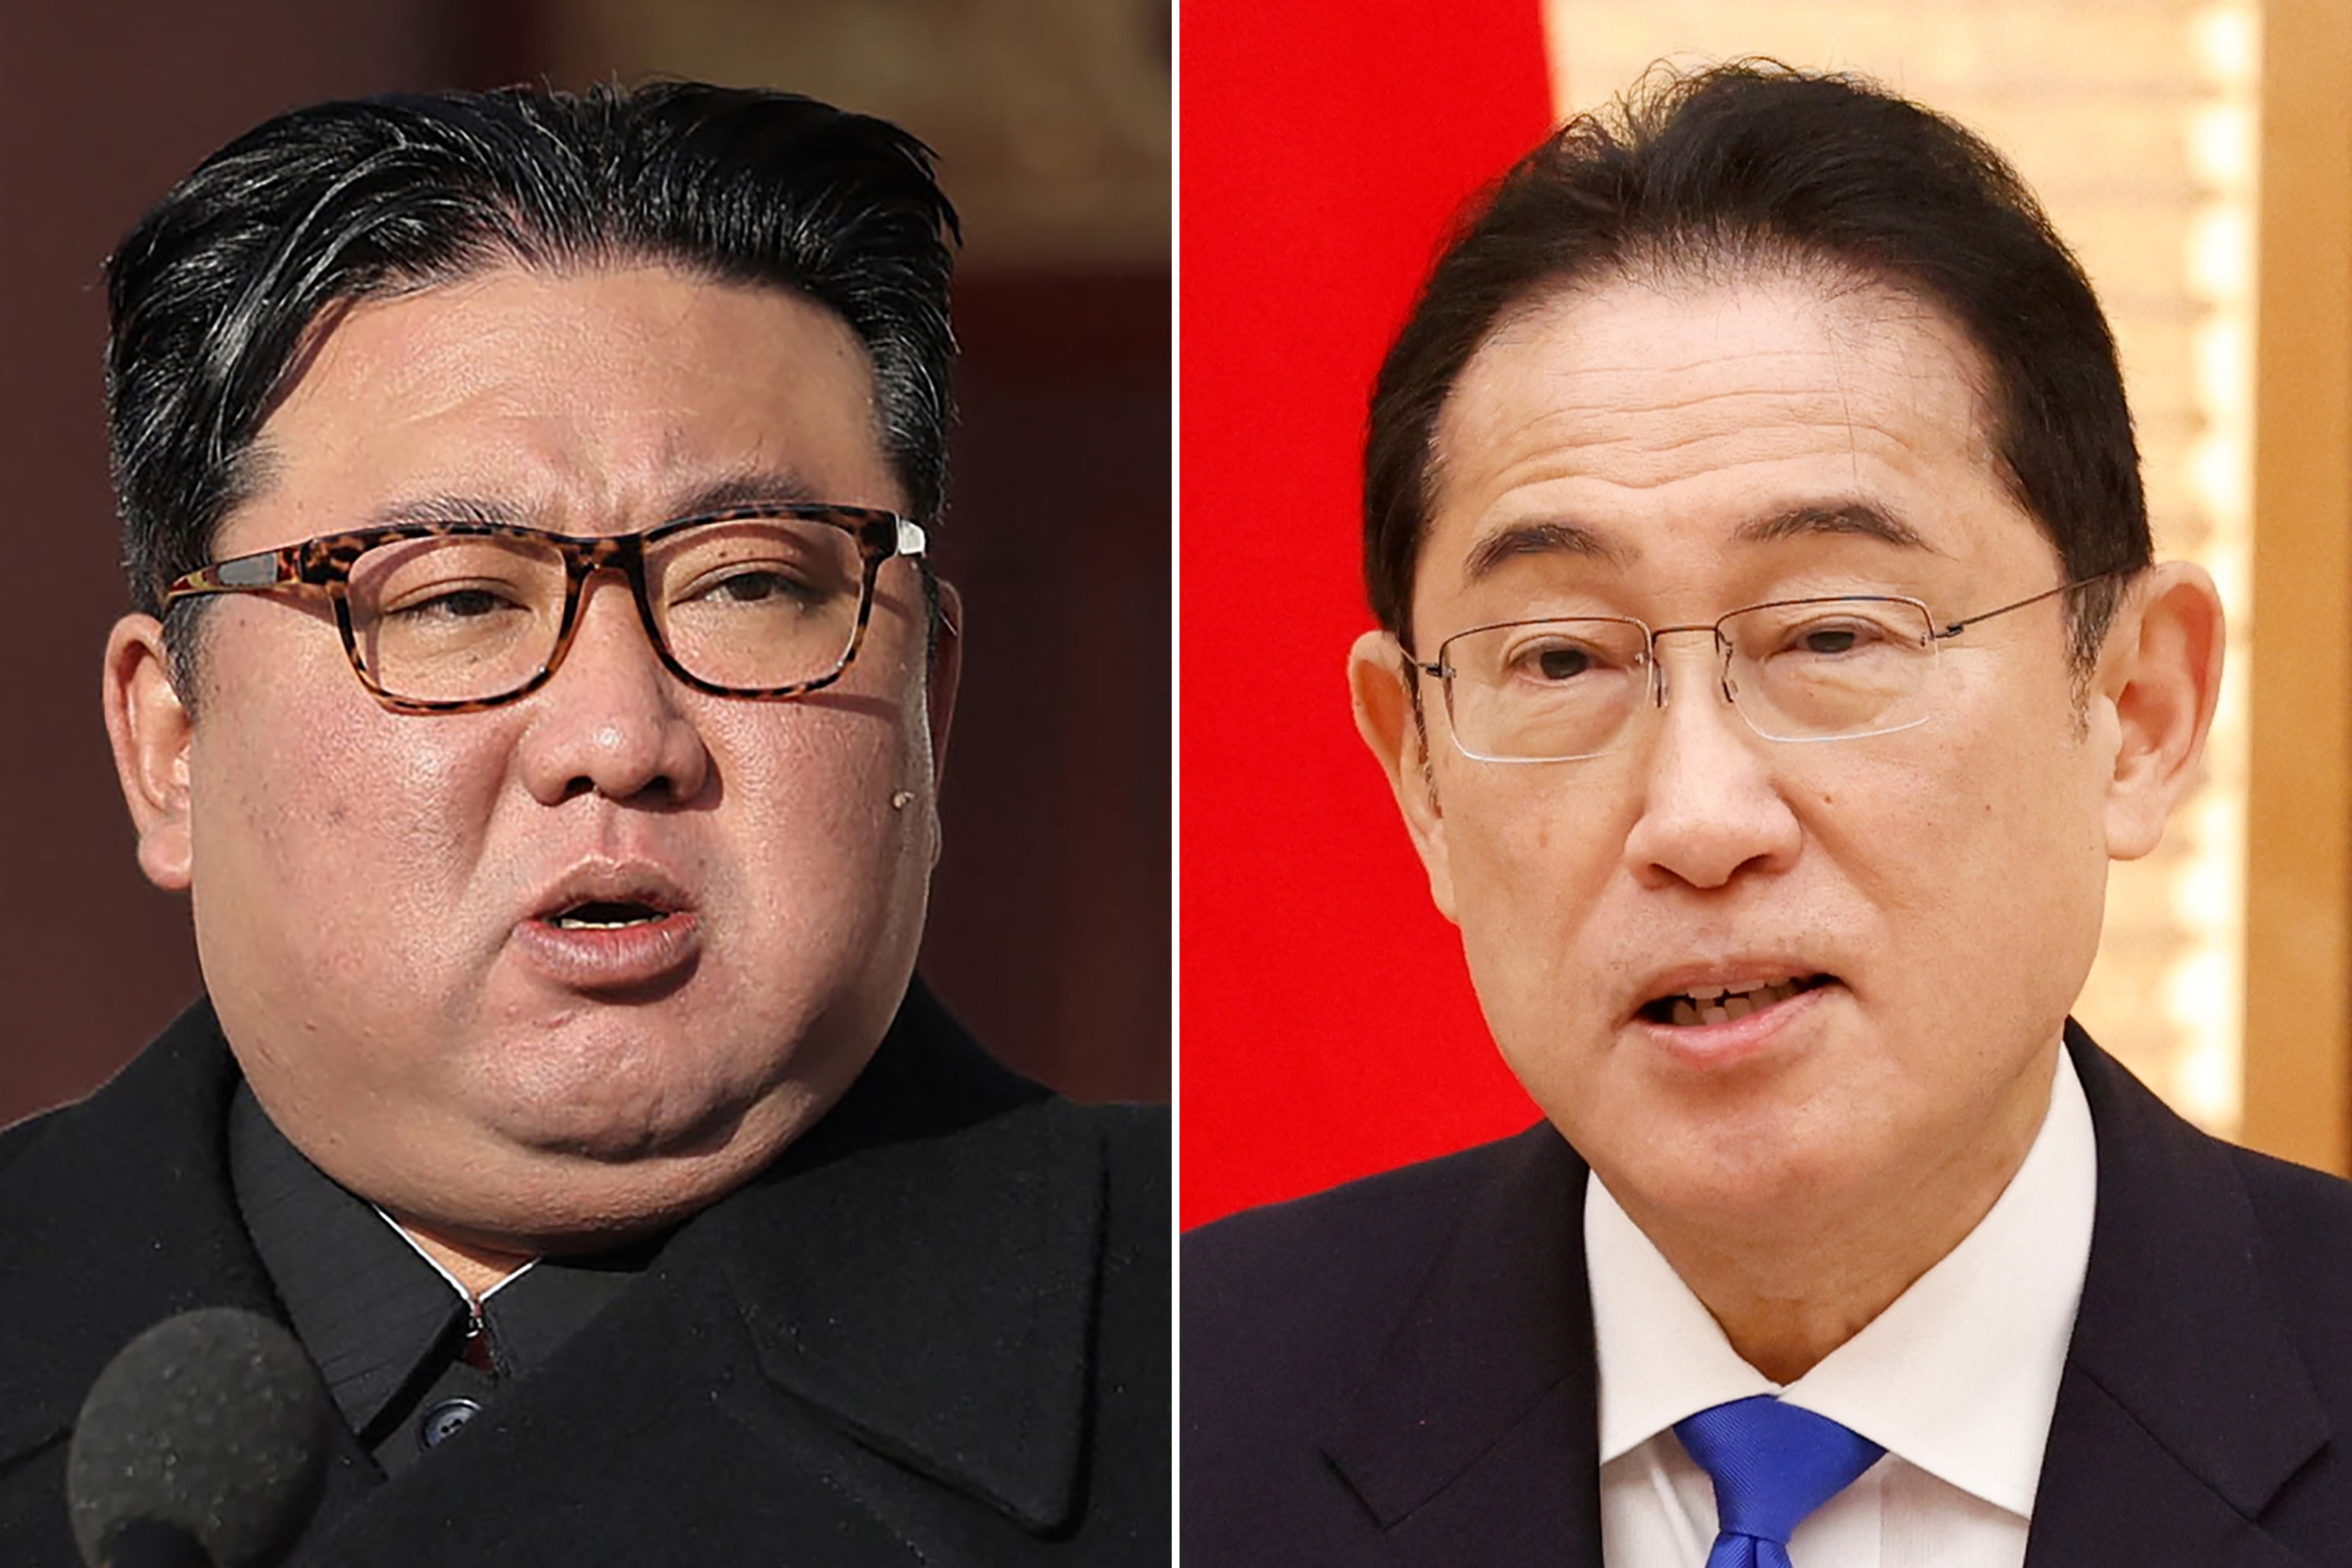 Japan’s Kishida (right) has previously said a summit with Kim Jong-un is essential to improve relations in the region